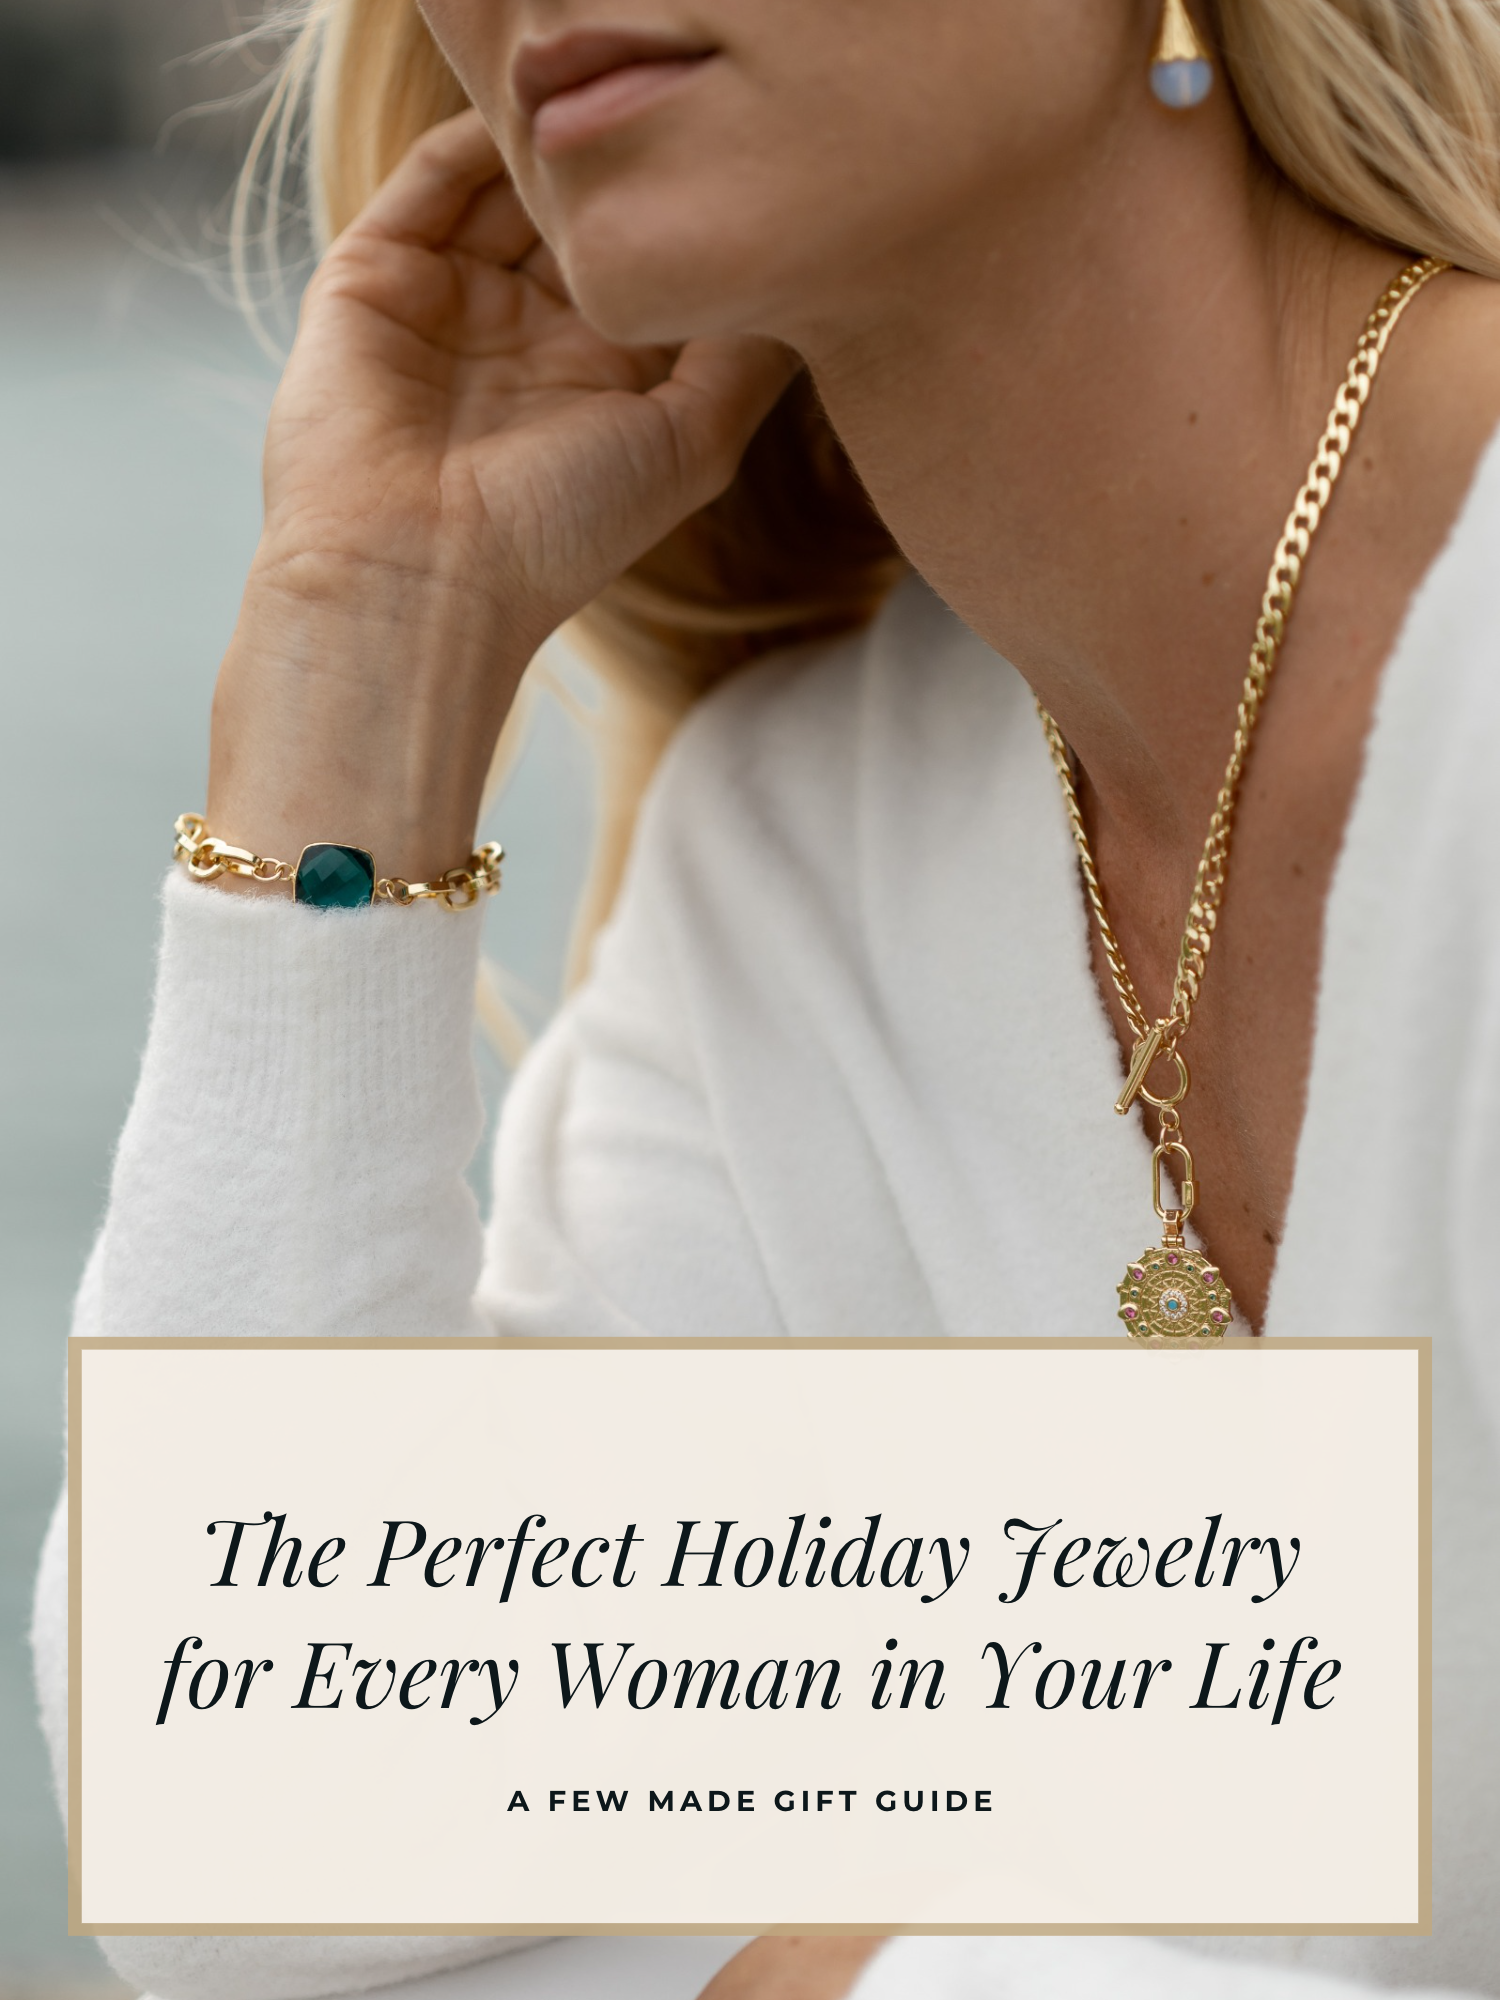 The Perfect Holiday Jewelry for Every Woman in Your Life - A Few Made Gift Guide